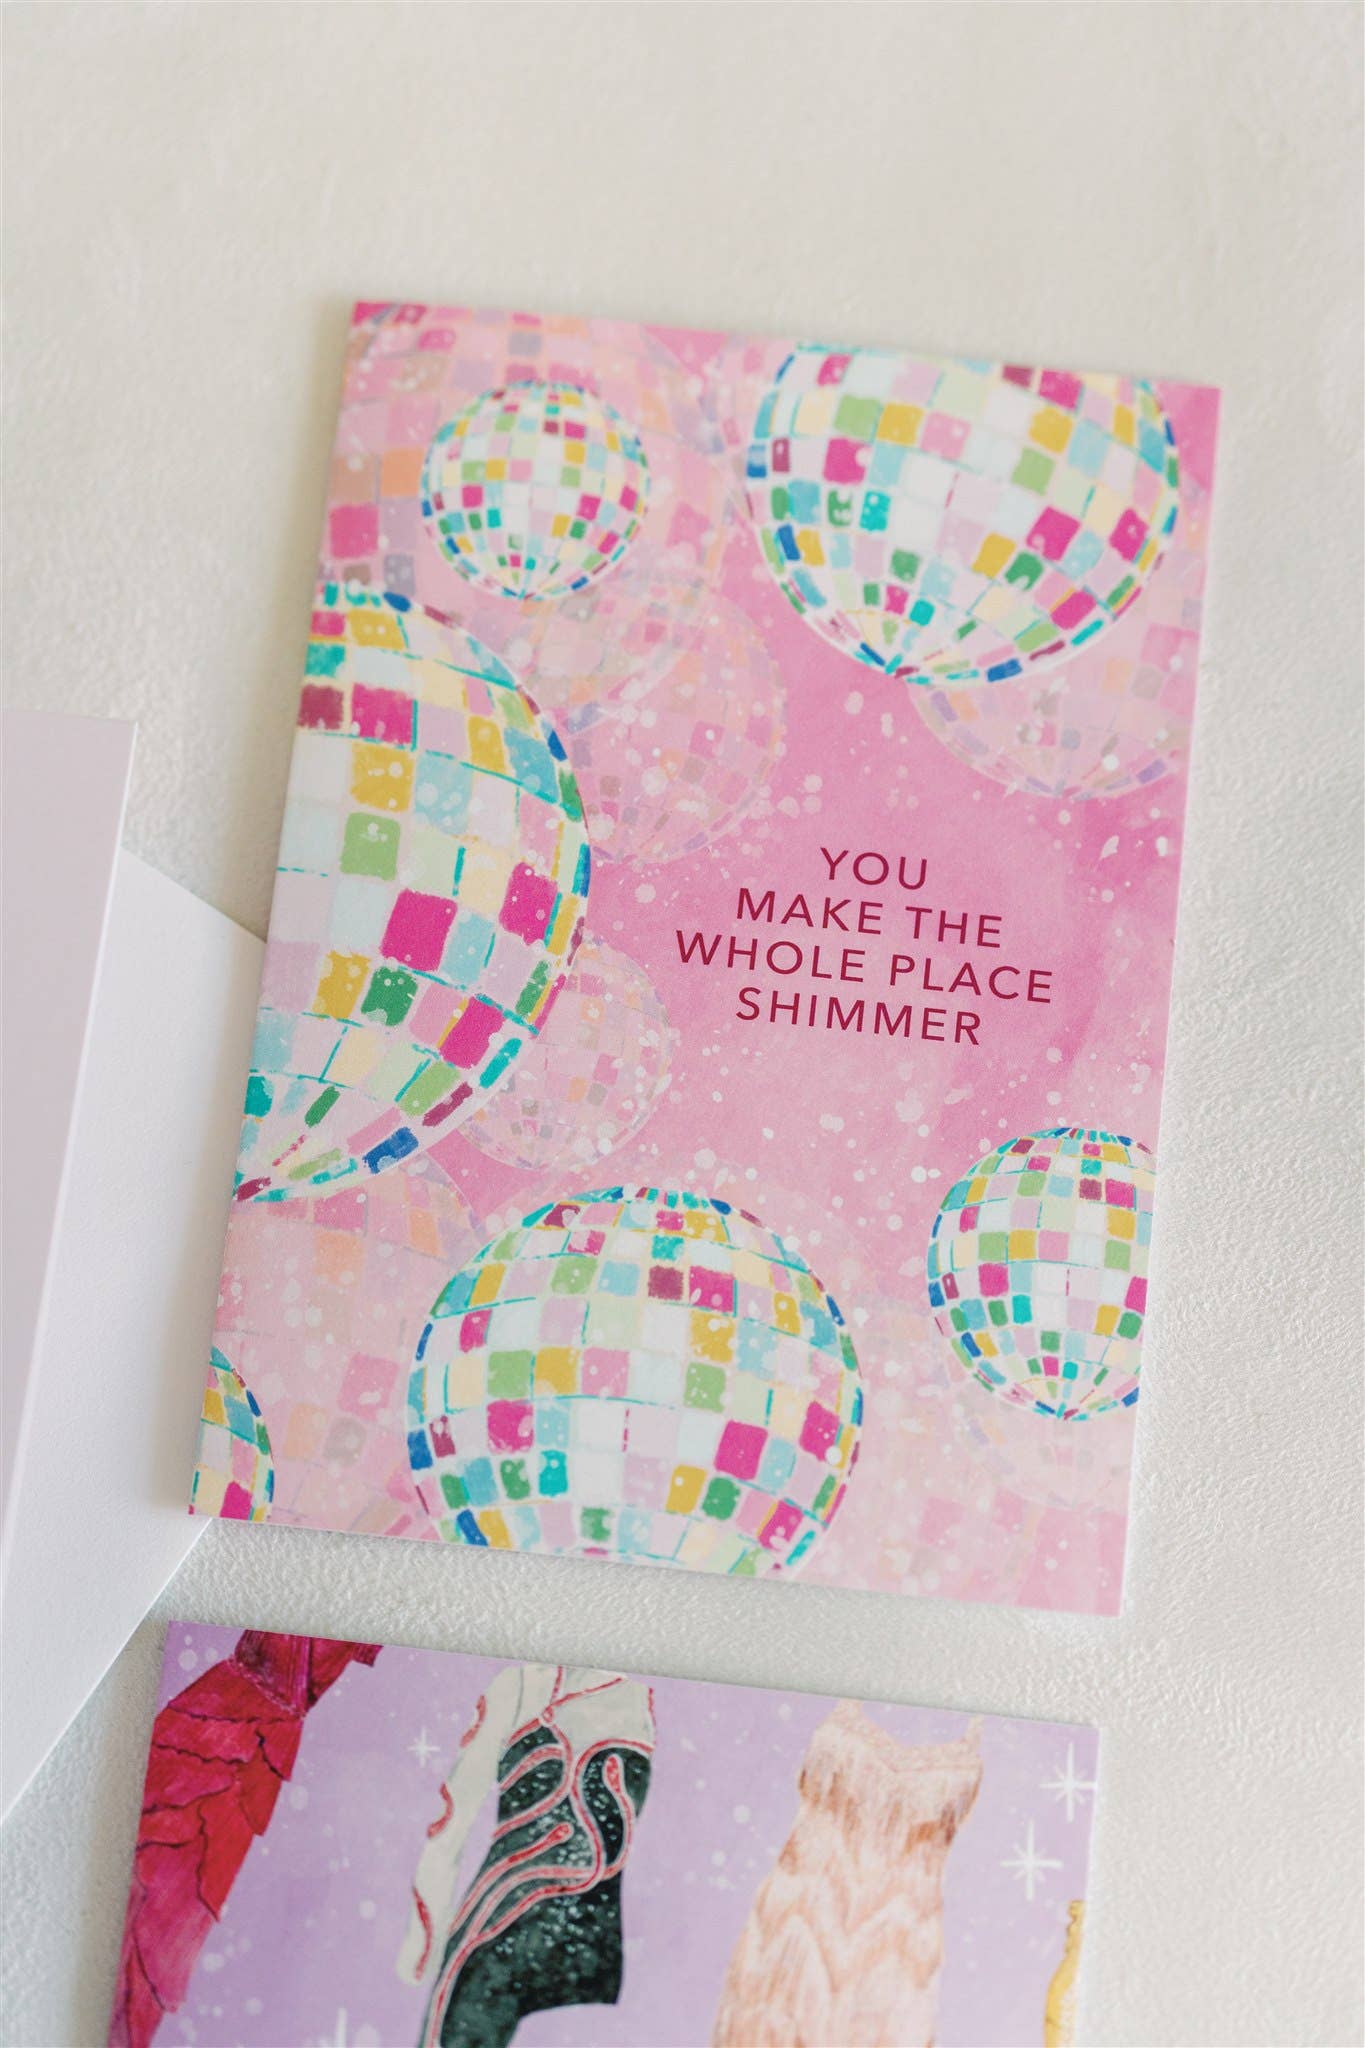 "The Whole Place Shimmer" Greeting Card / Taylor Swift